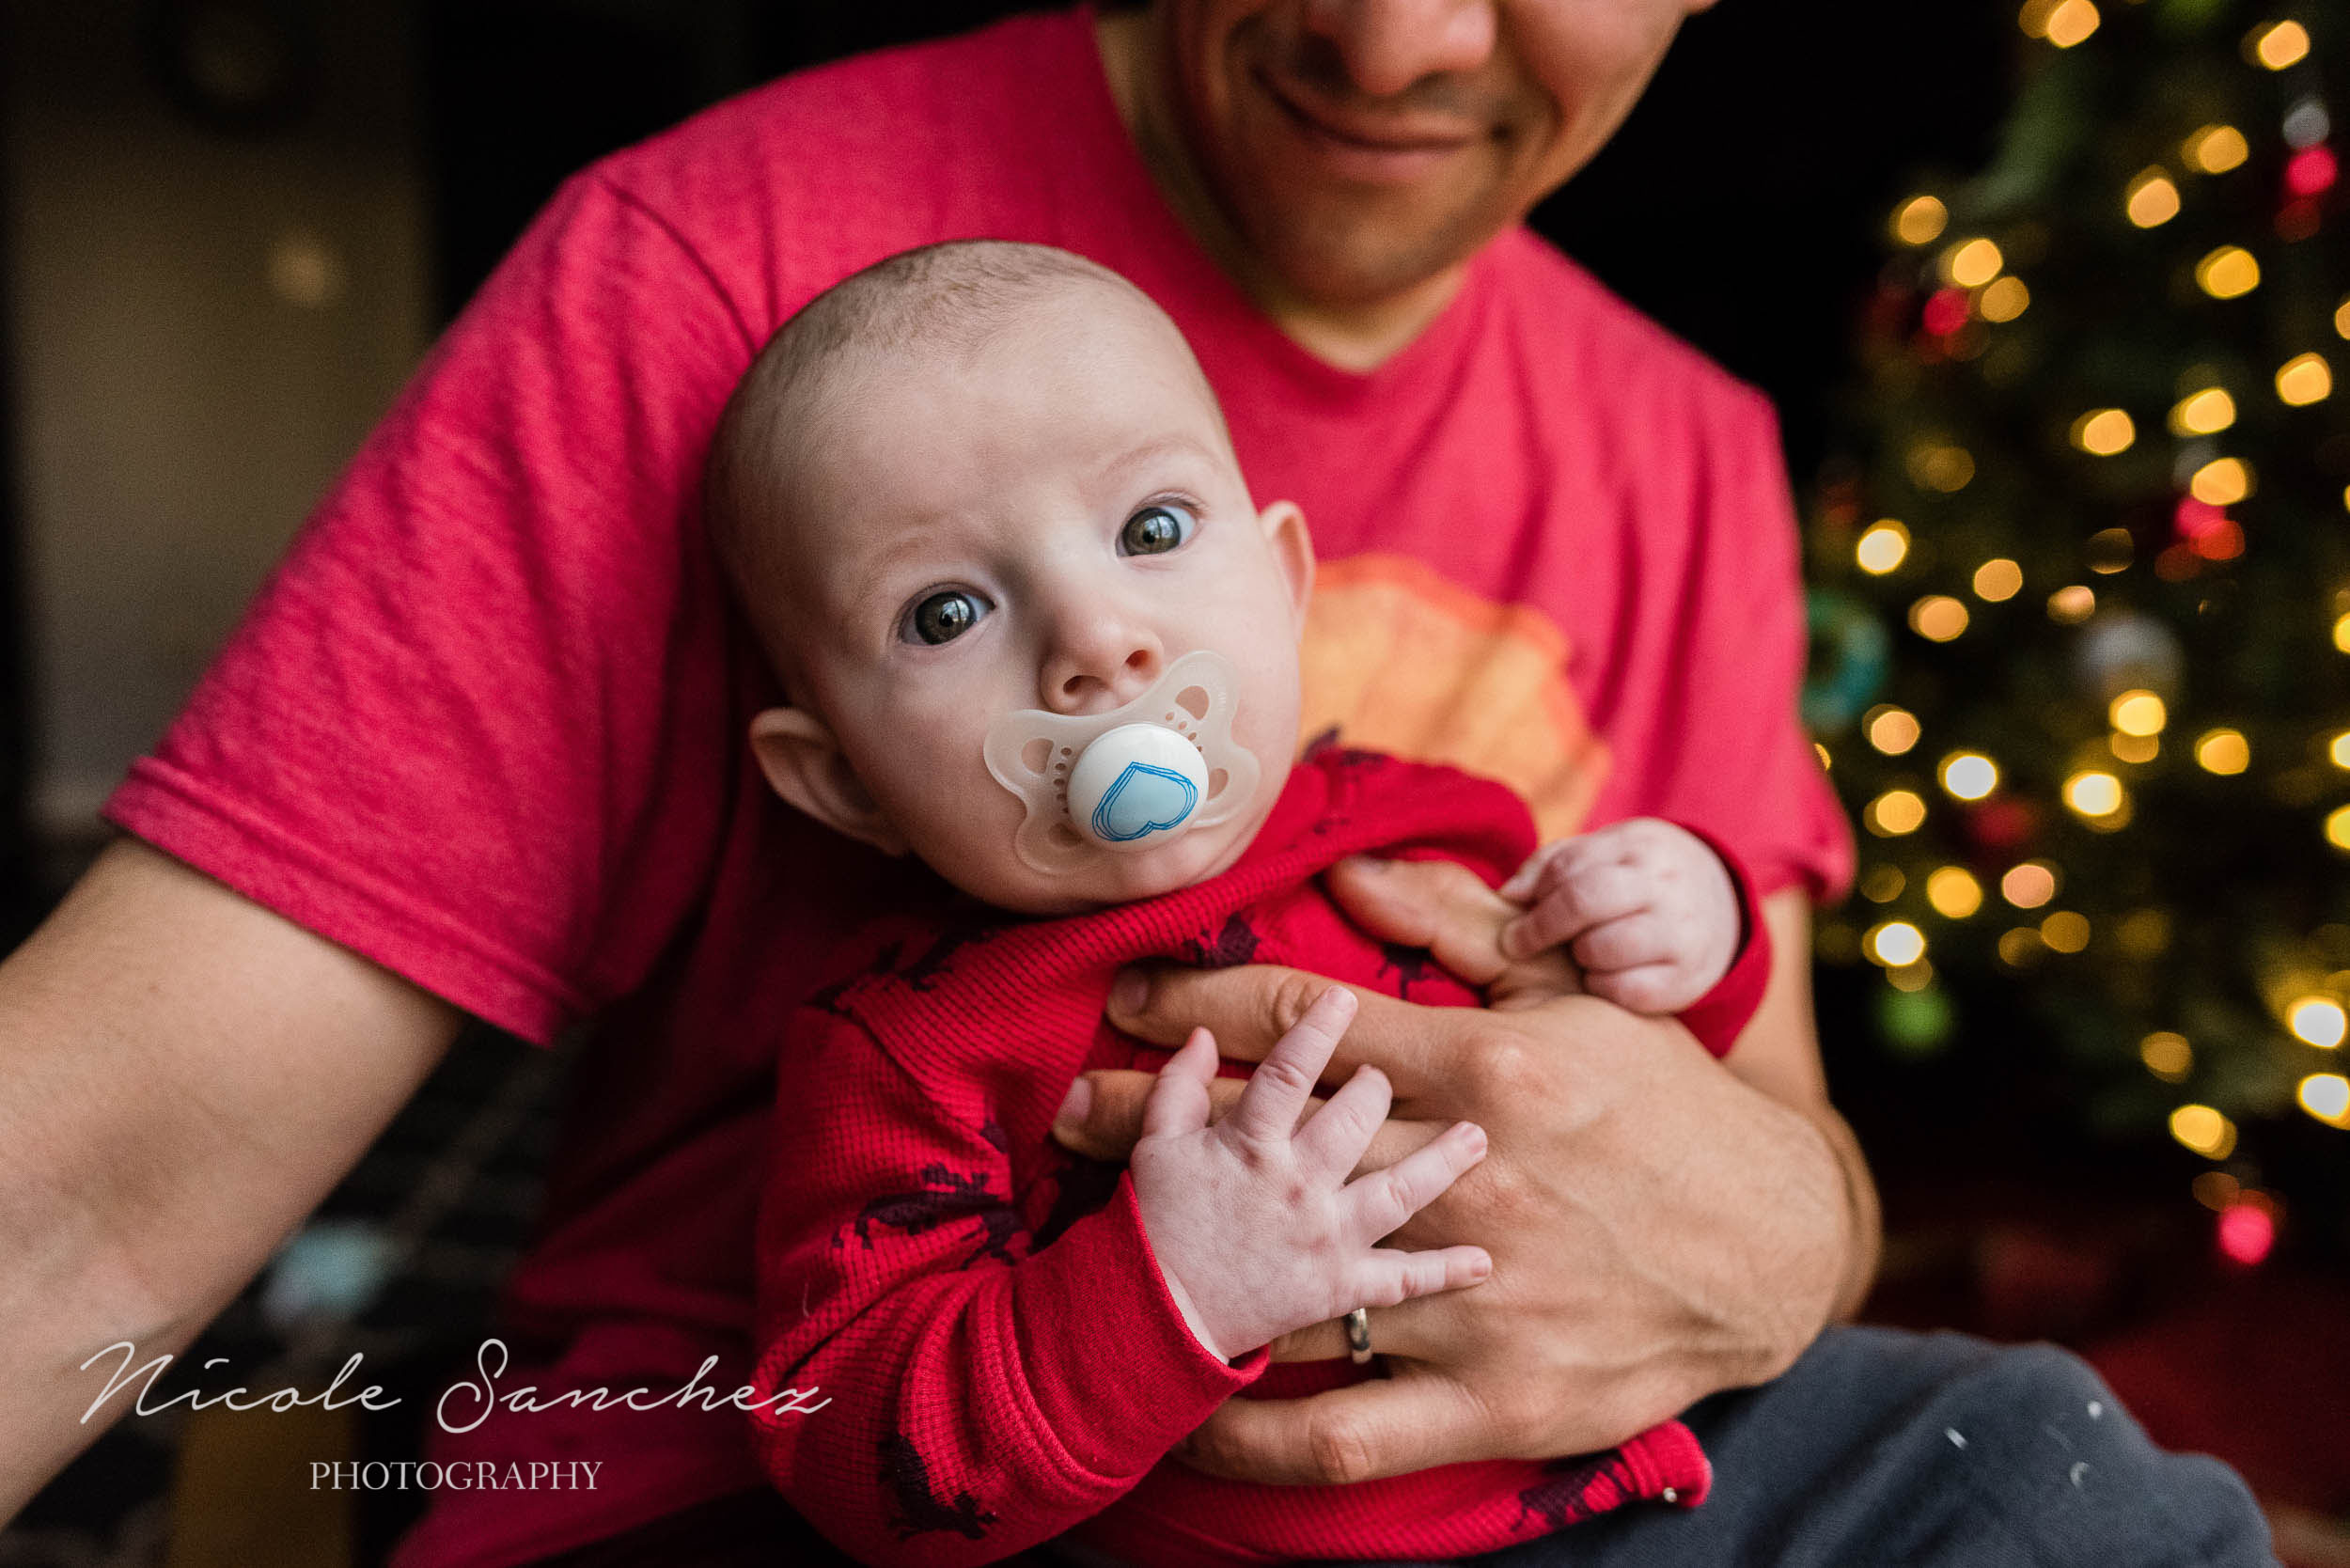 photographing-holiday-traditions-nicole-sanchez-northern-virginia-family-photographer-1.jpg